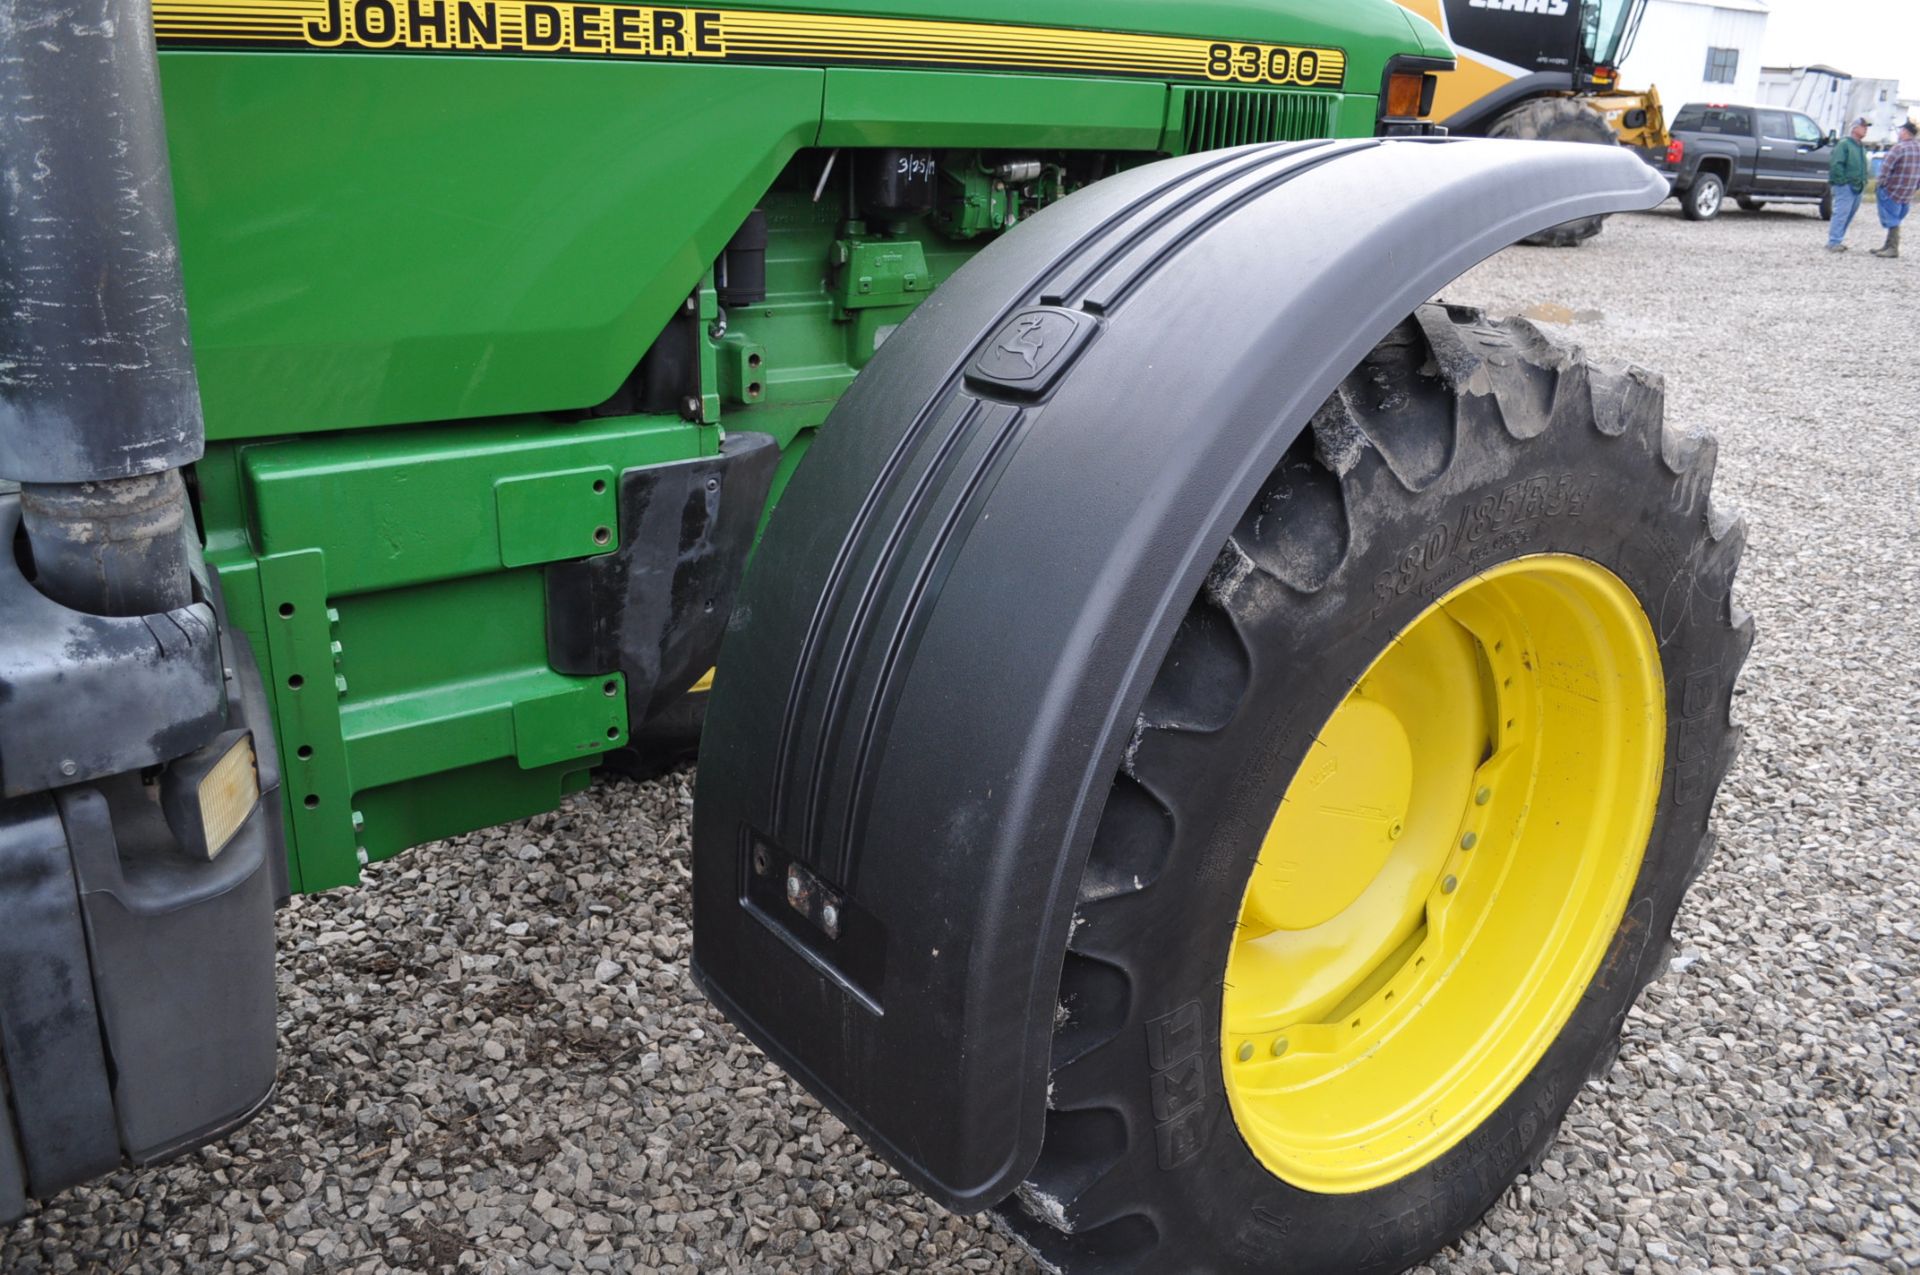 John Deere 8300 tractor, MFWD, 480/80 R 46 duals, 380/85 R 34 front, fenders, front wts, 4 hyd - Image 9 of 21